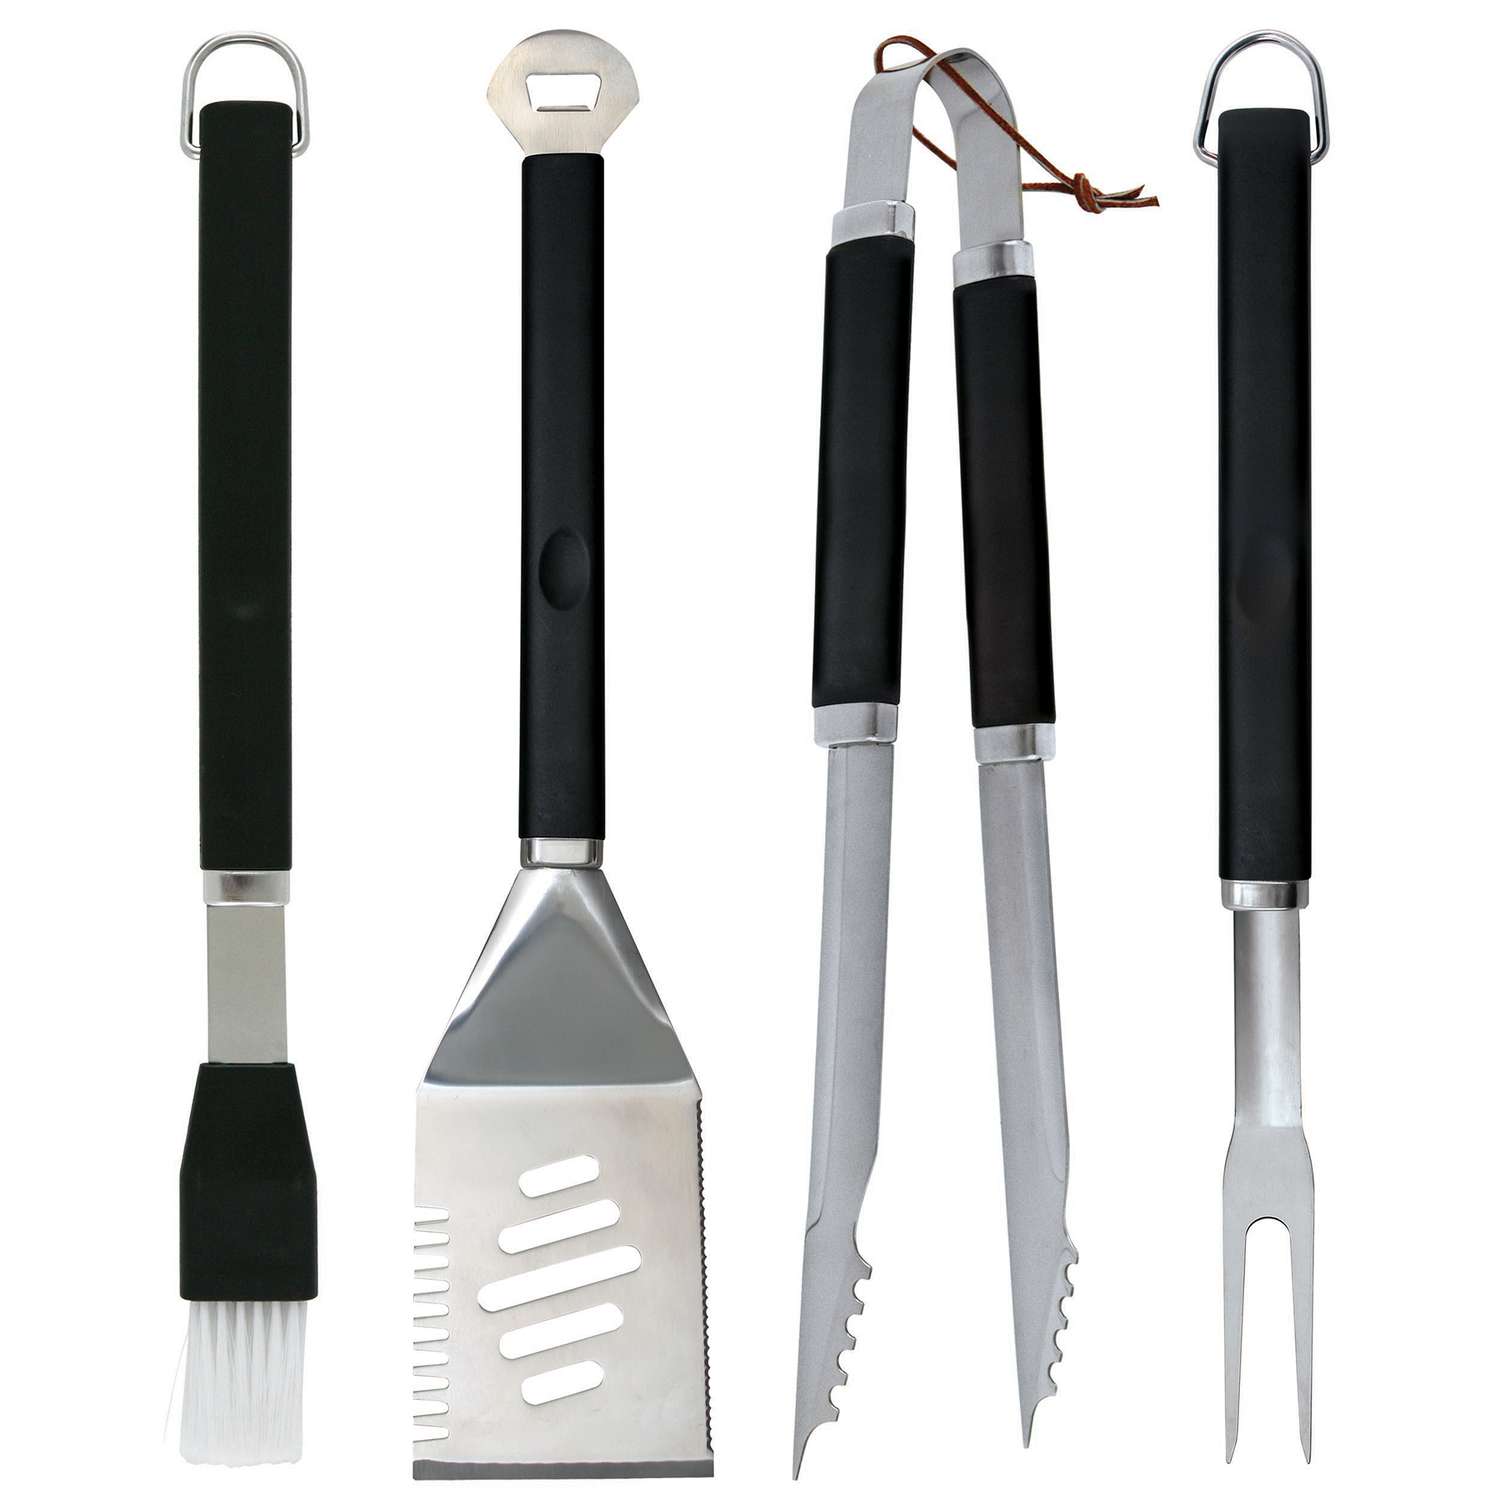 Mr Bar-B-Q Oversized Locking Tongs Stainless Steel With Non-Slip Rubber  Grip